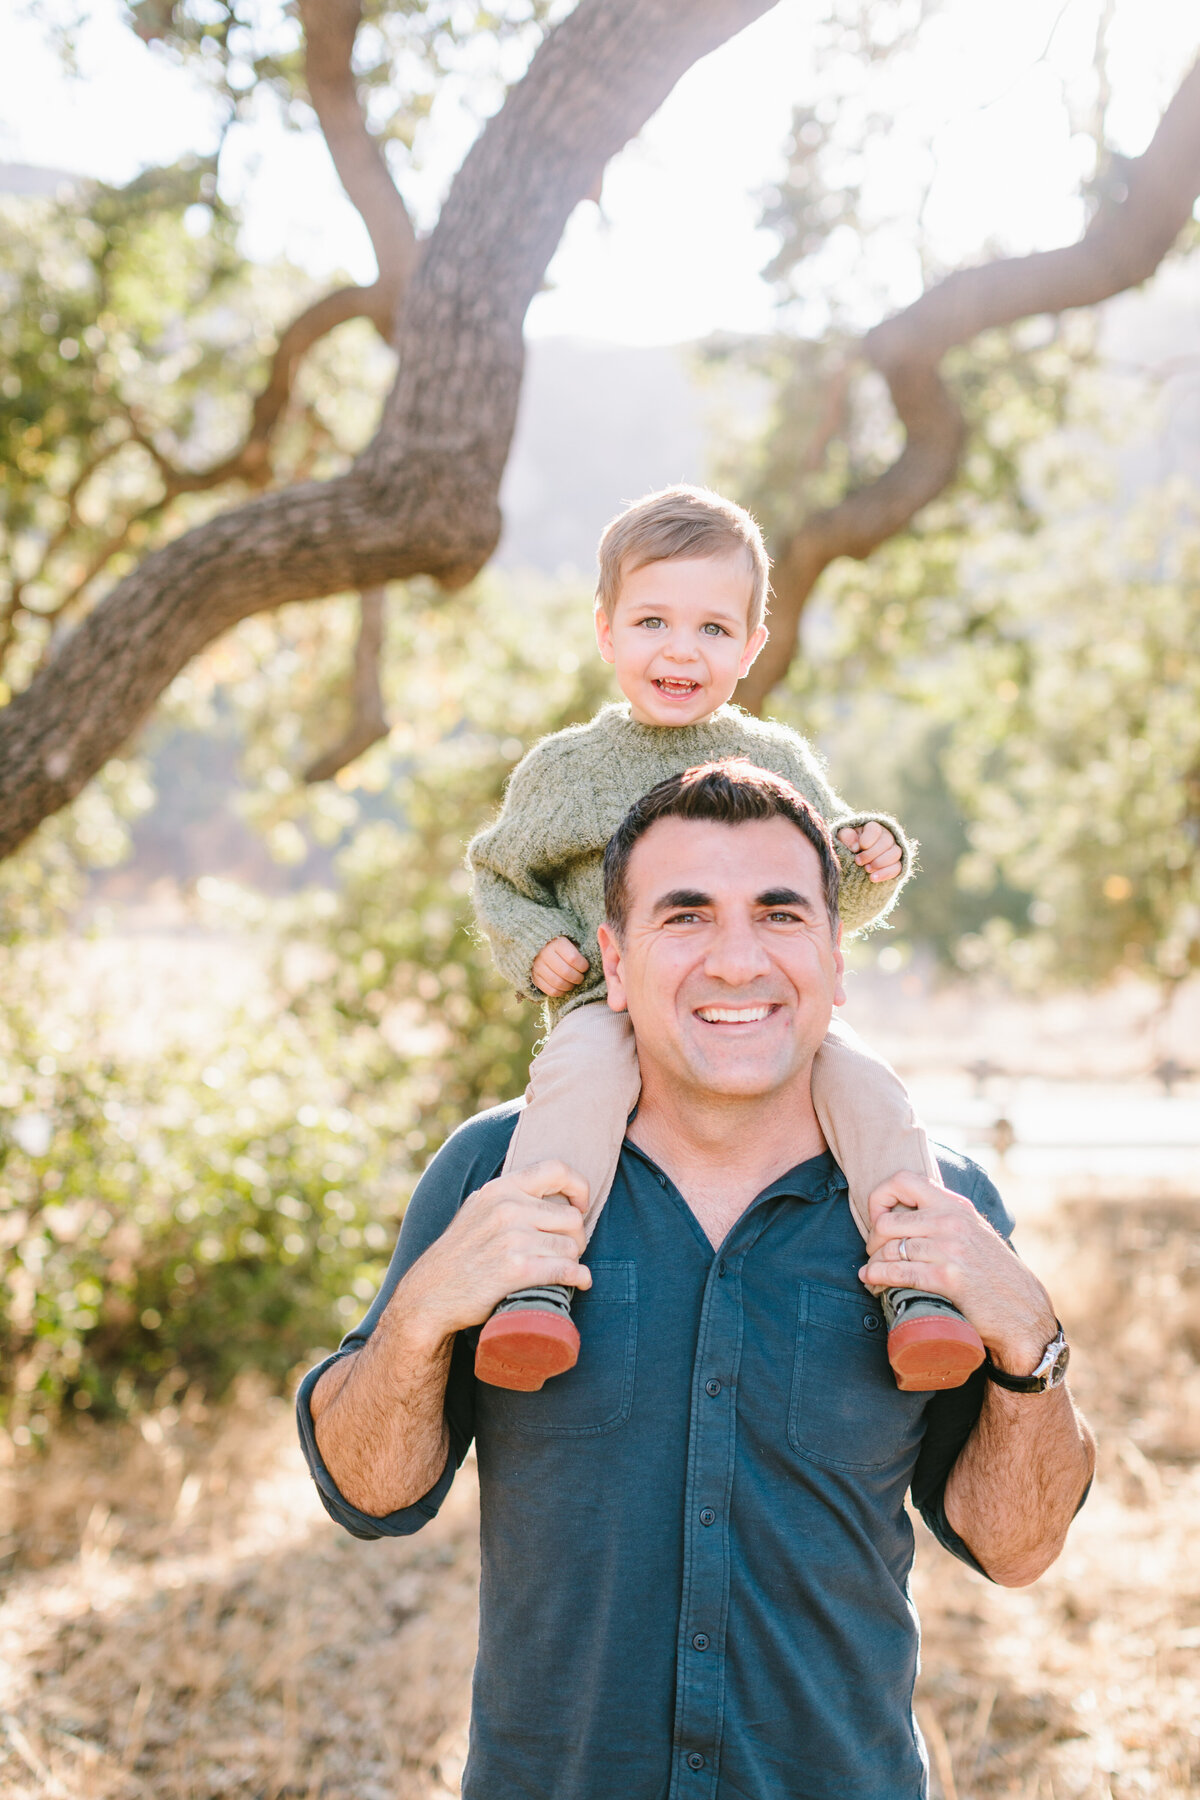 Best California and Texas Family Photographer-Jodee Debes Photography-53